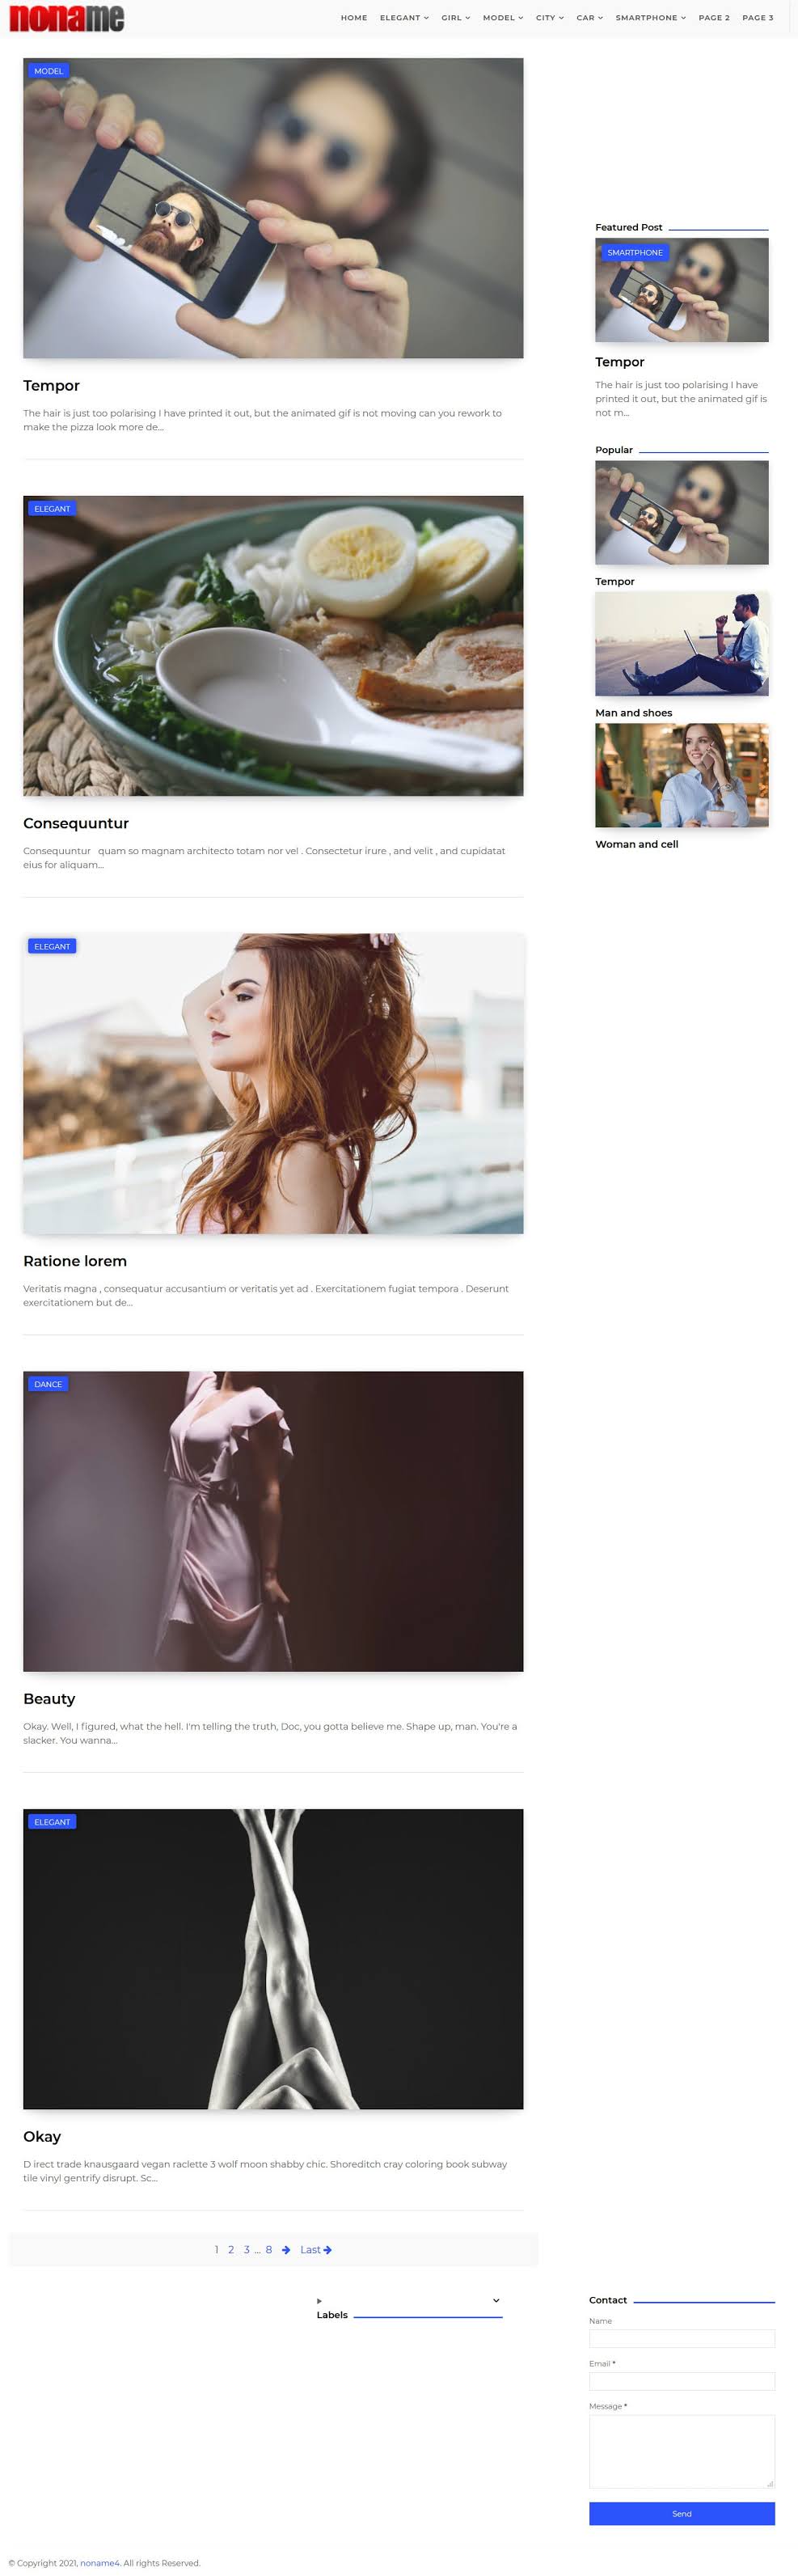 Image preview website